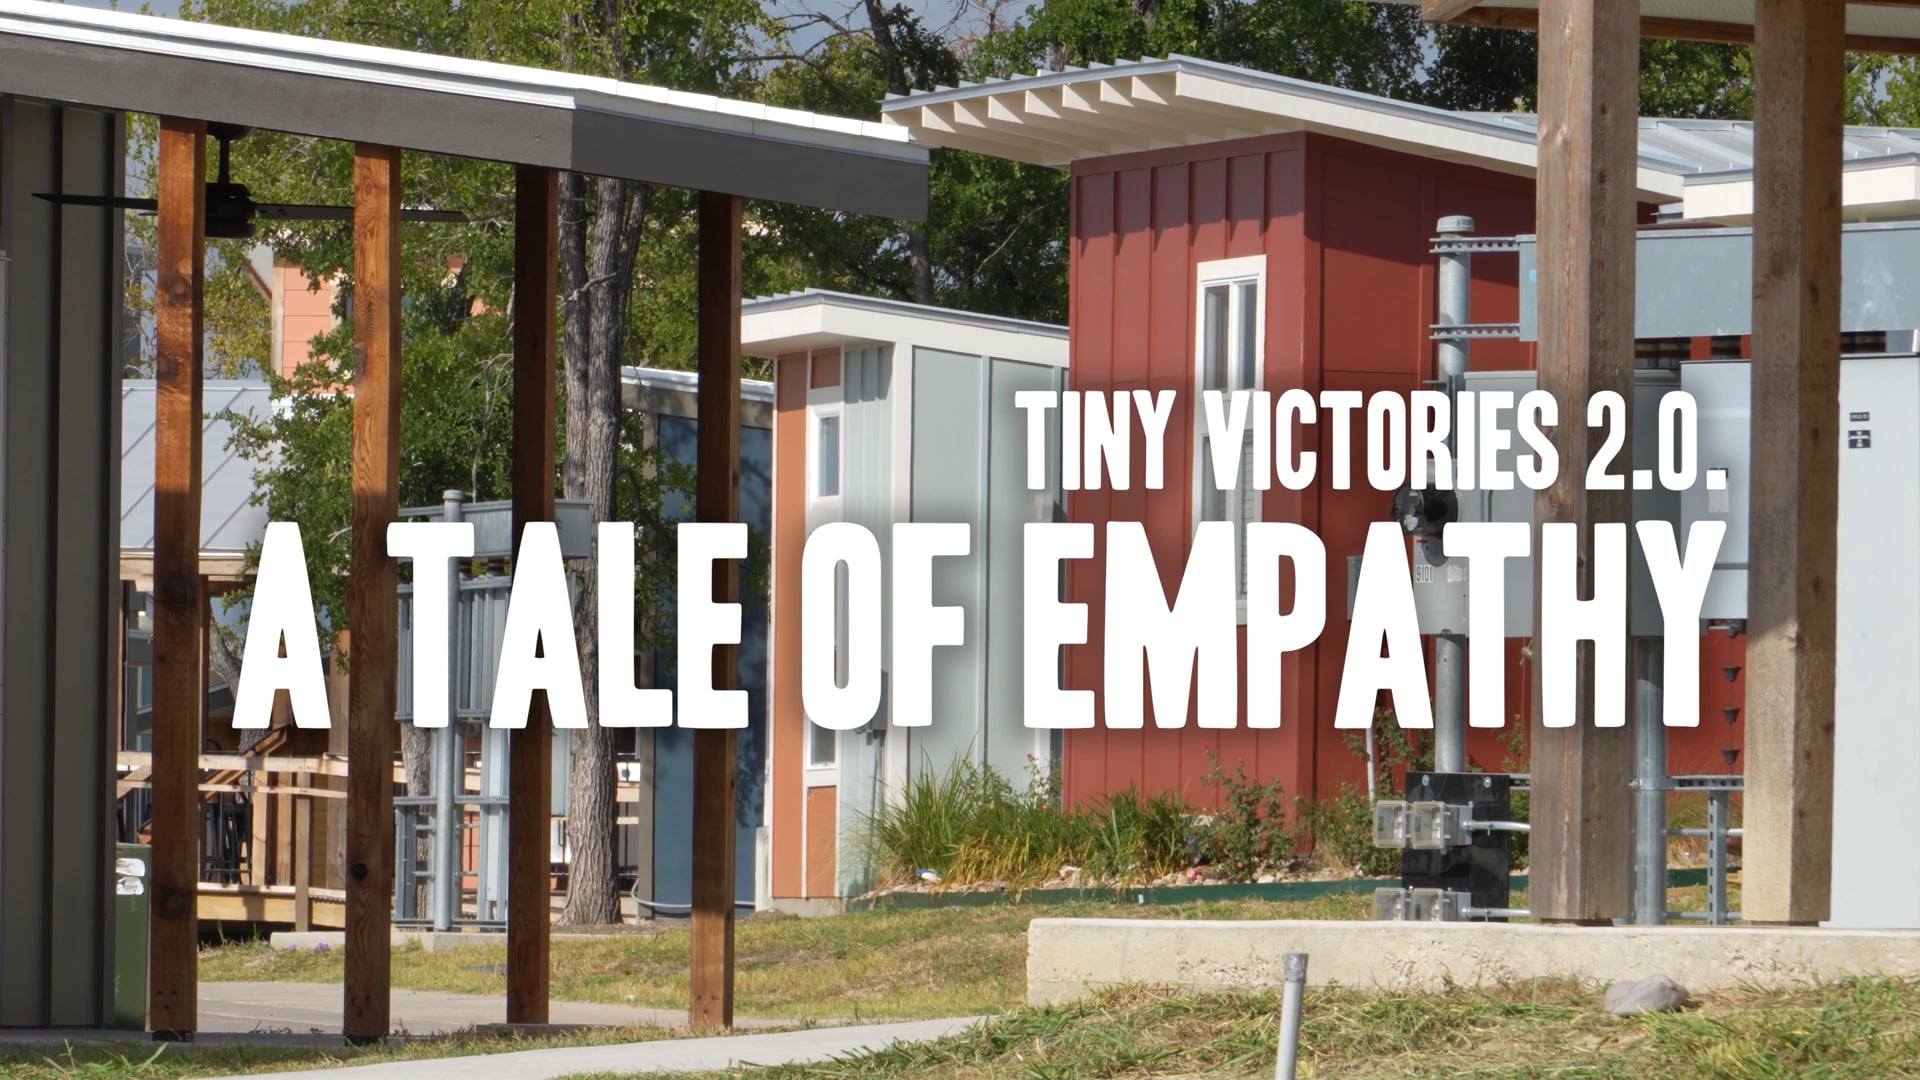 AIA FILM CHALLENGE - "Tiny Victories 2.0." A Tale of Empathy